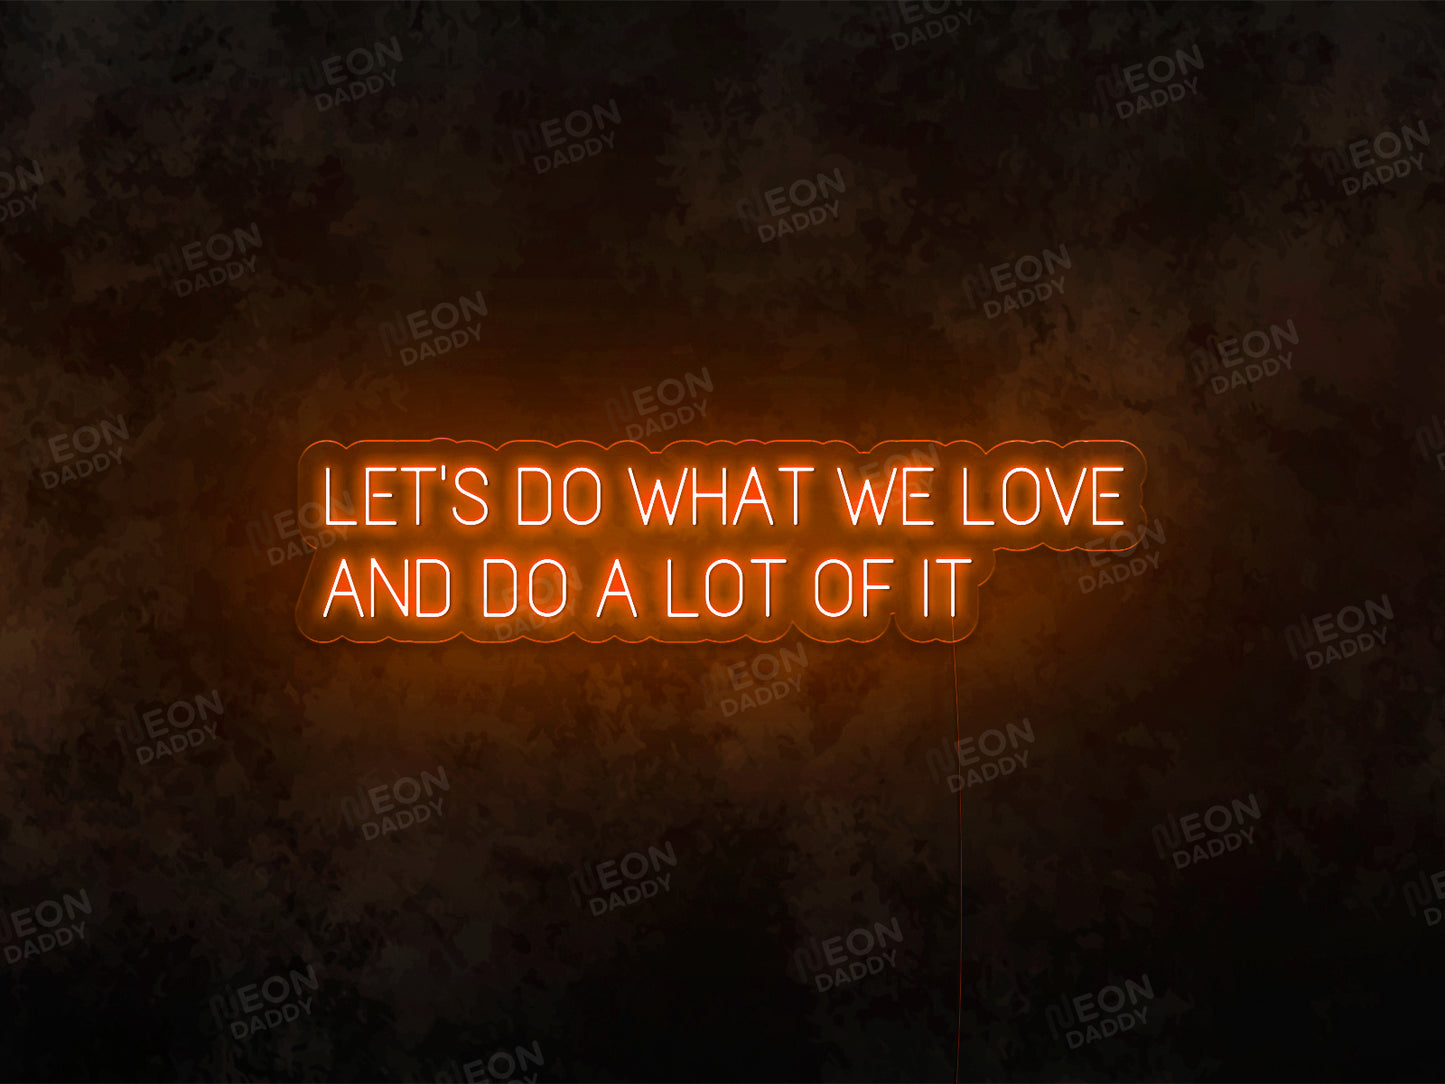 Lets Do What We Love And Do a Lot of It